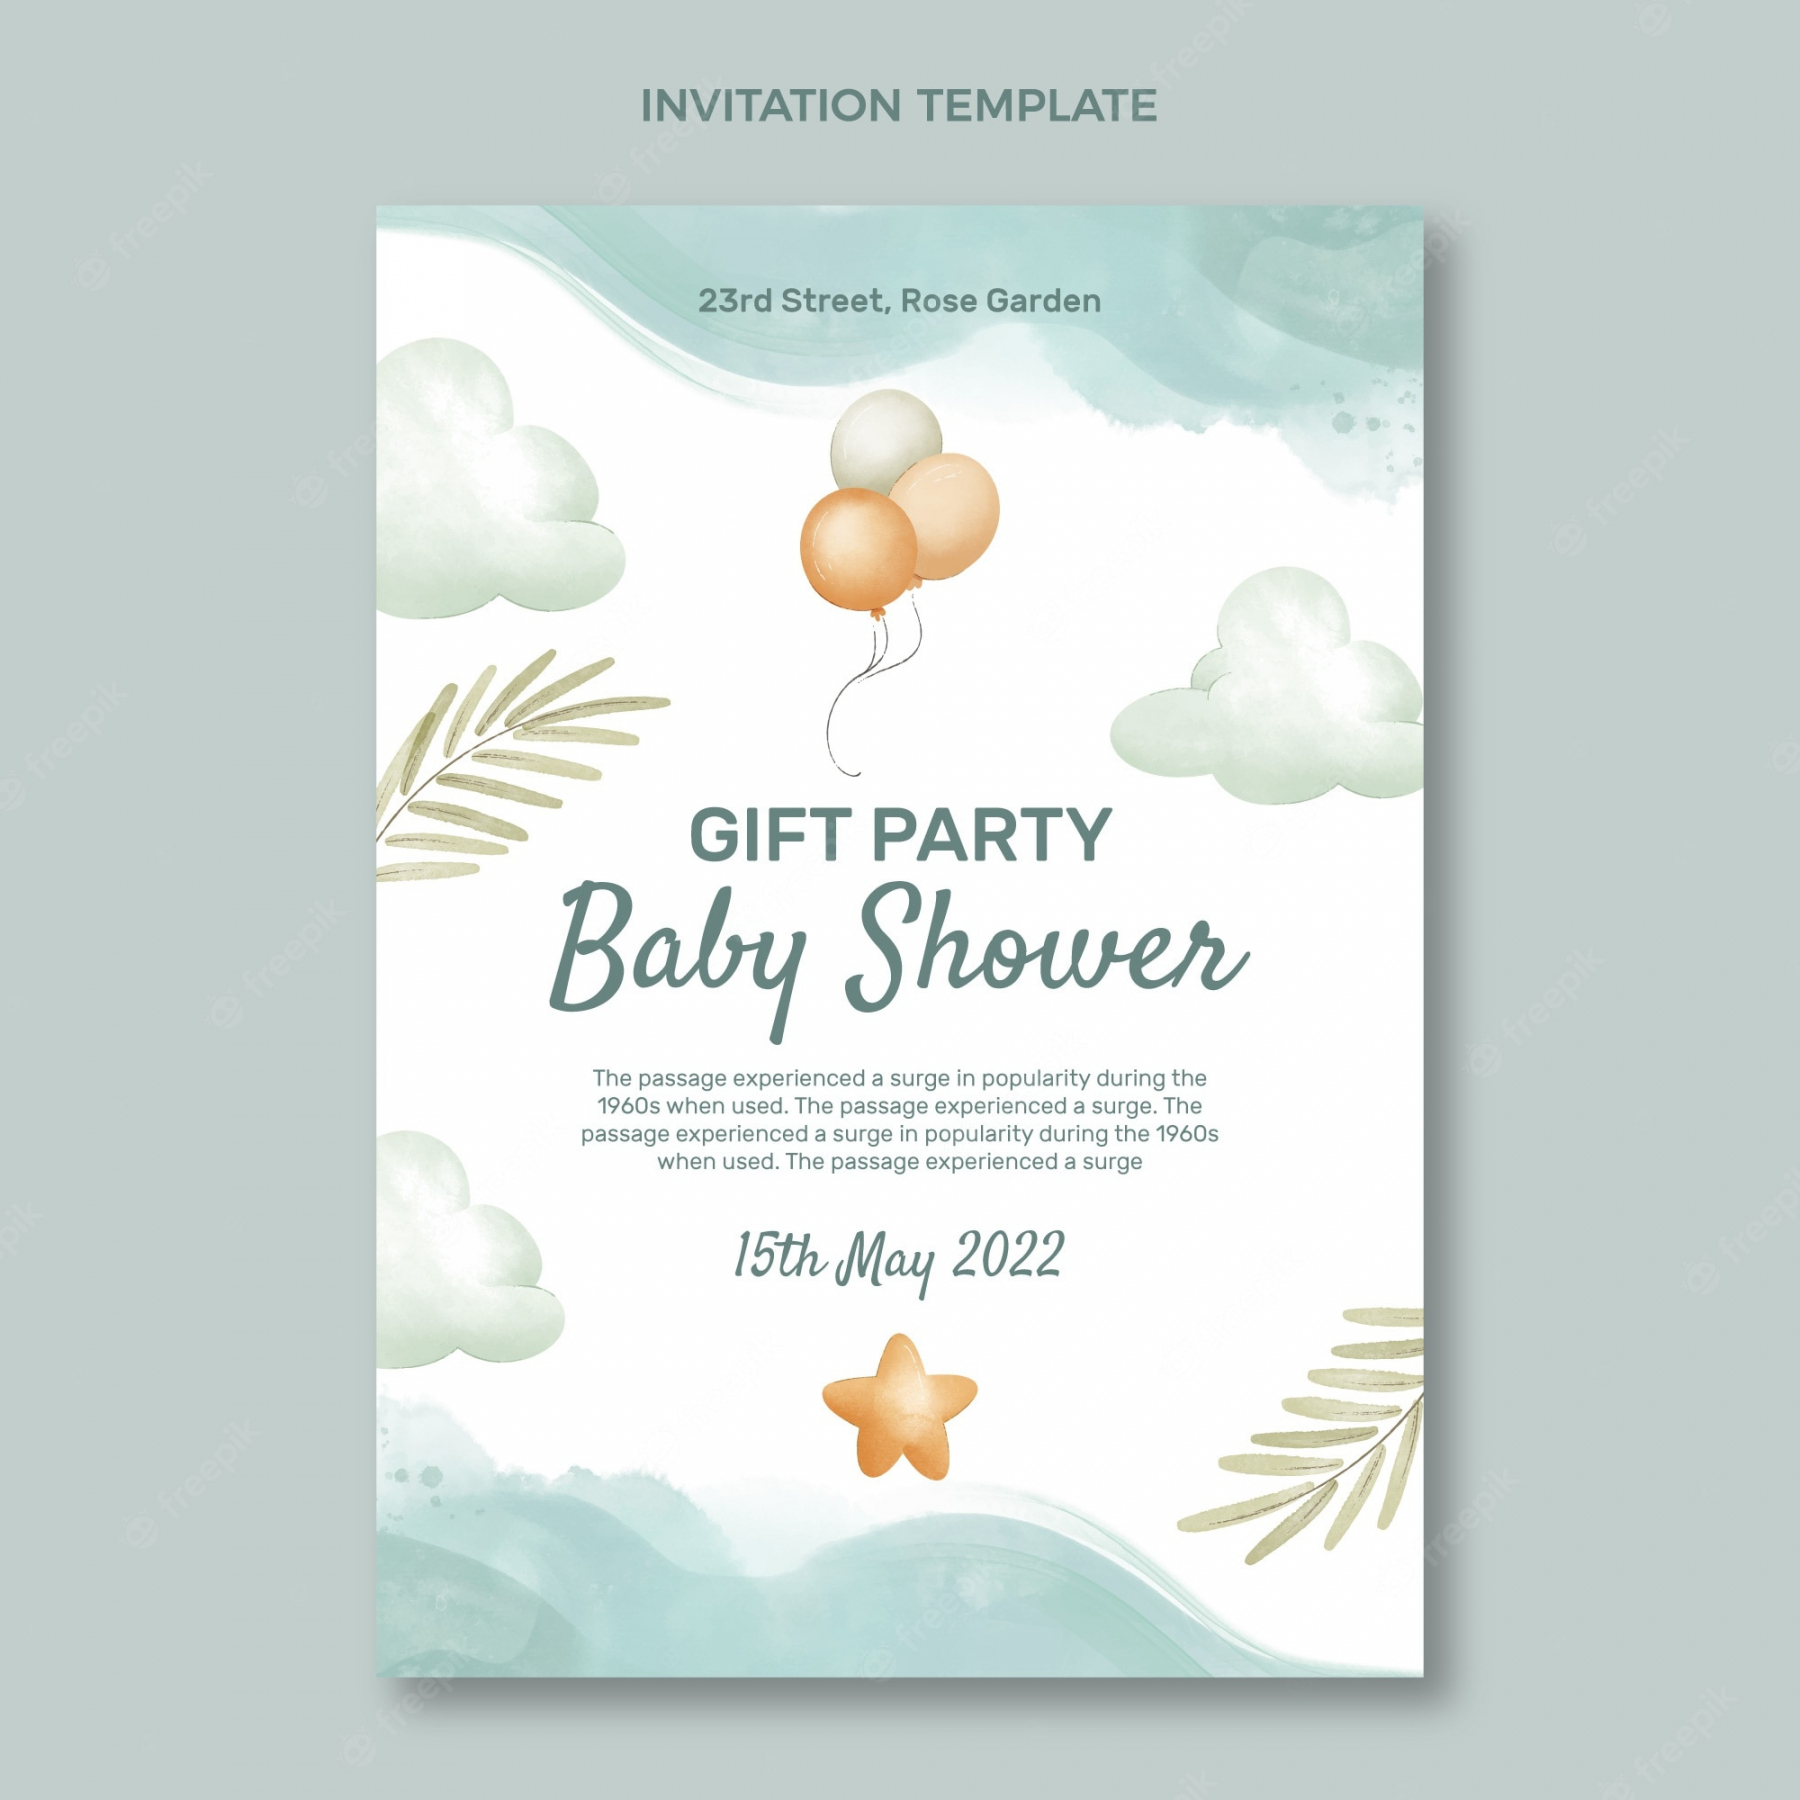 Baby Shower Invitation Template - Free Vectors & PSDs to Download - FREE Printables - Free Printable Baby Shower Invitations